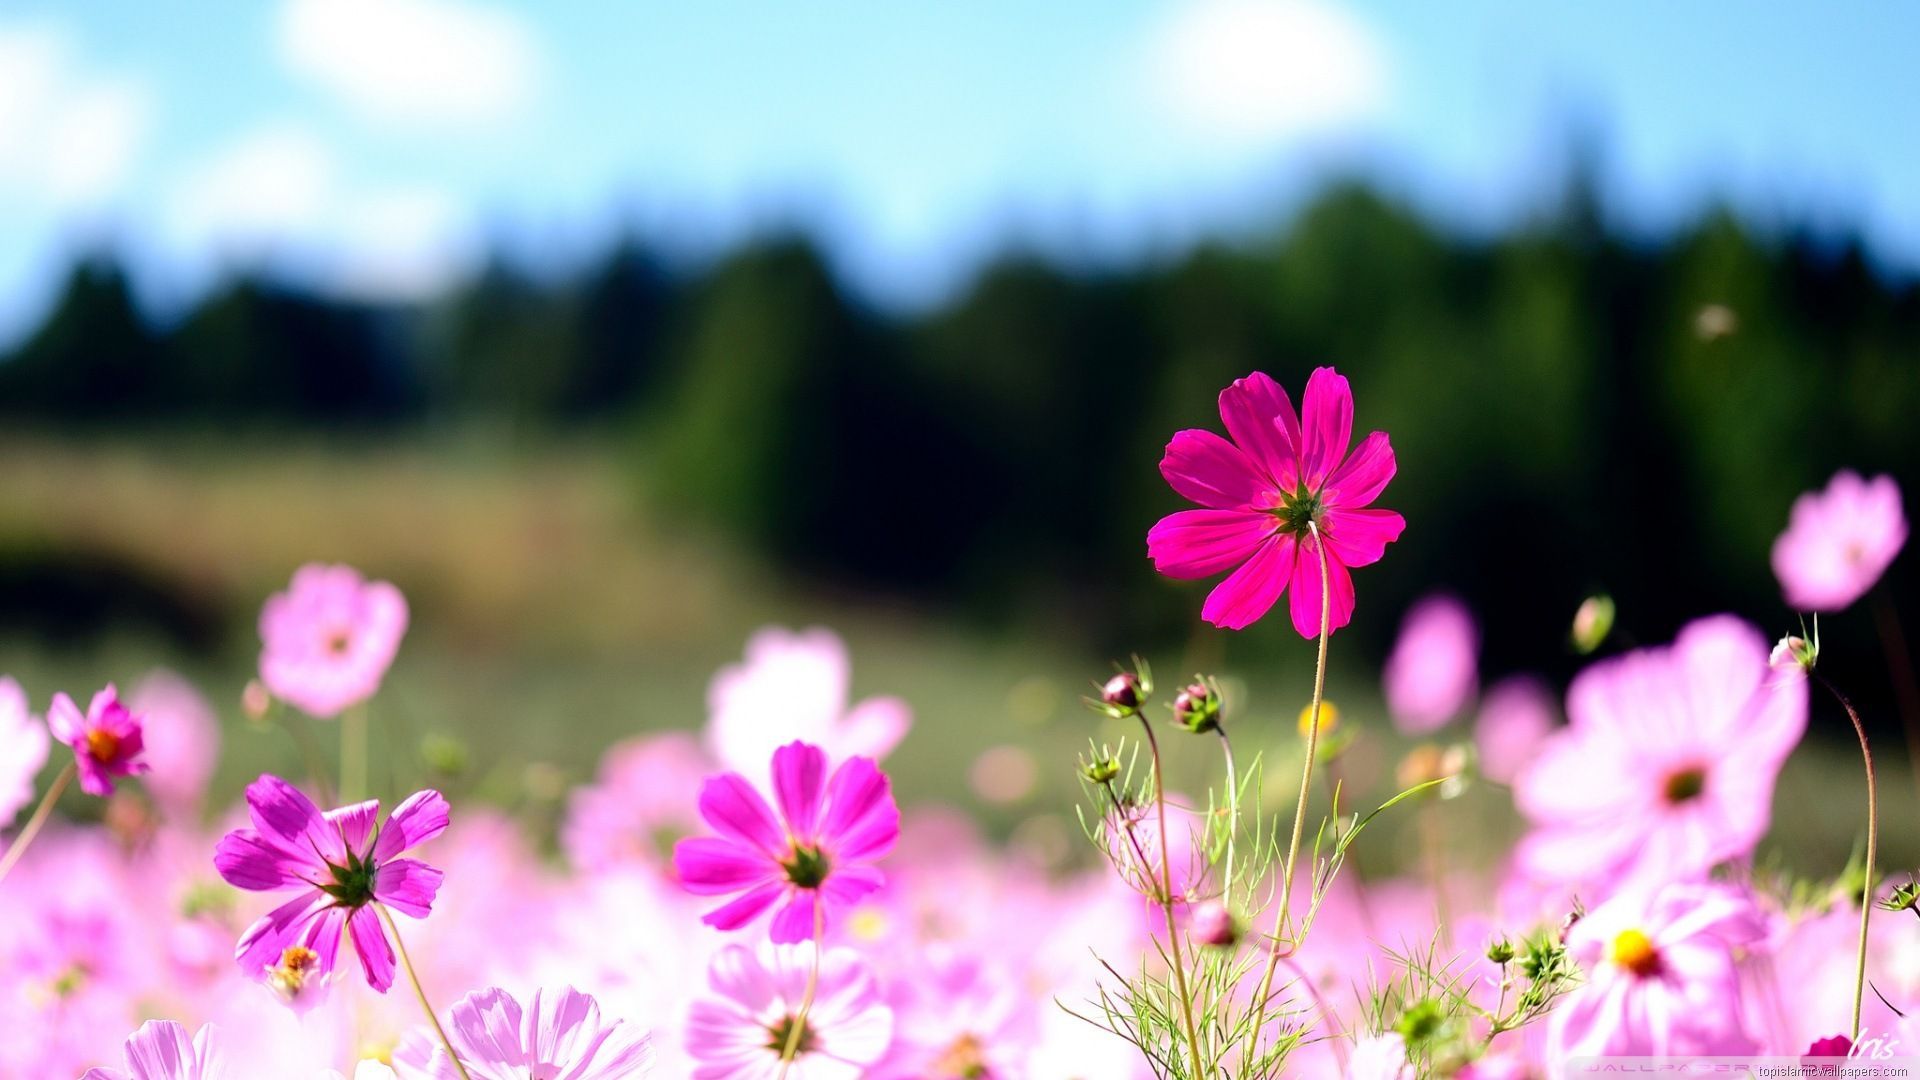 Flowers wallpapers desktop backgrounds hd pictures and images